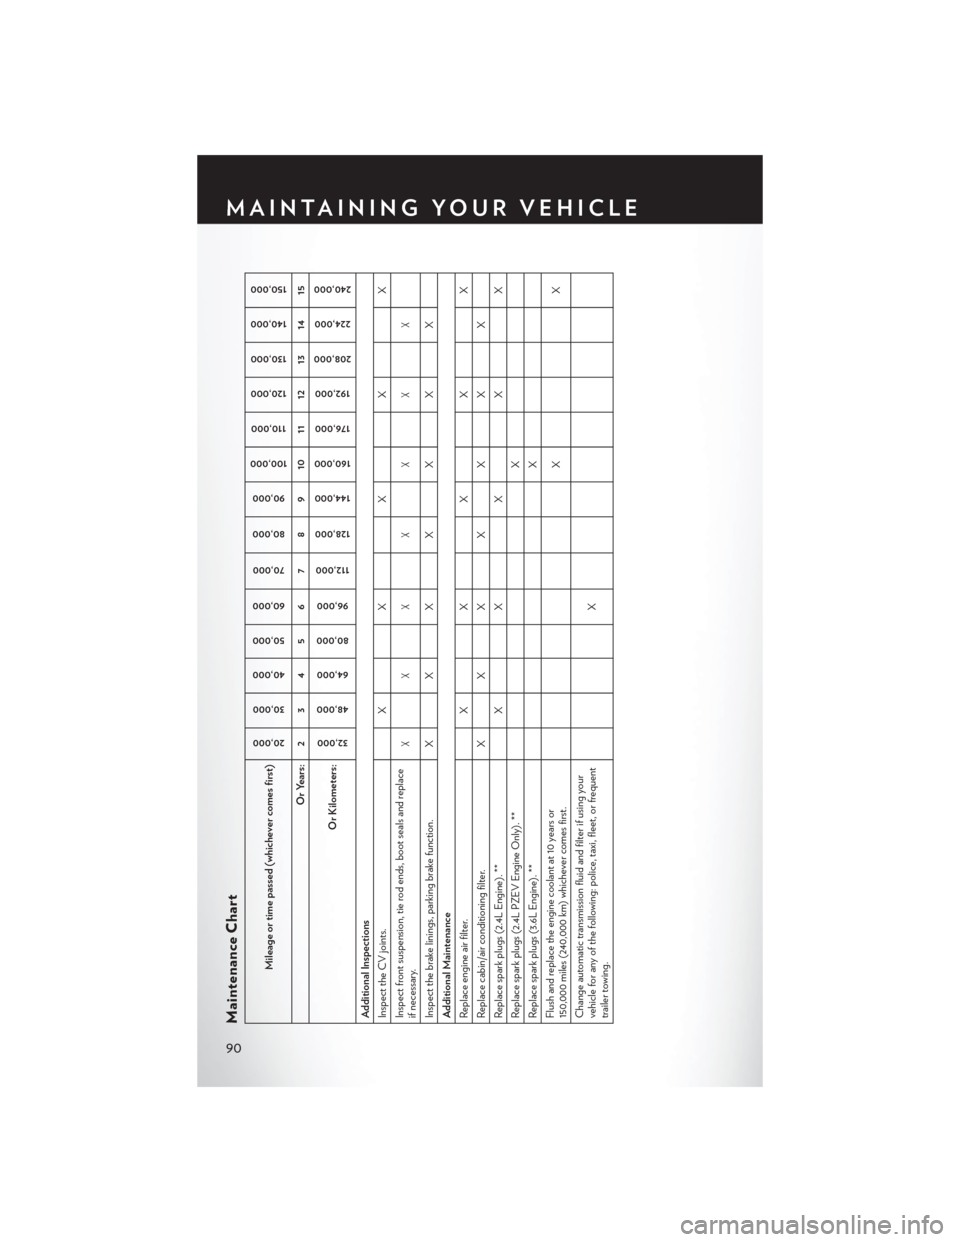 CHRYSLER 200 2013 1.G User Guide Maintenance Chart
Mileage or time passed (whichever comes first)
20,00030,000
40,000 50,000
60,000
70,000
80,000 90,000
100,000 110,000
120,000 130,000
140,000 150,000
Or Years: 2 3 4 5 6 7 8 9 10 11 